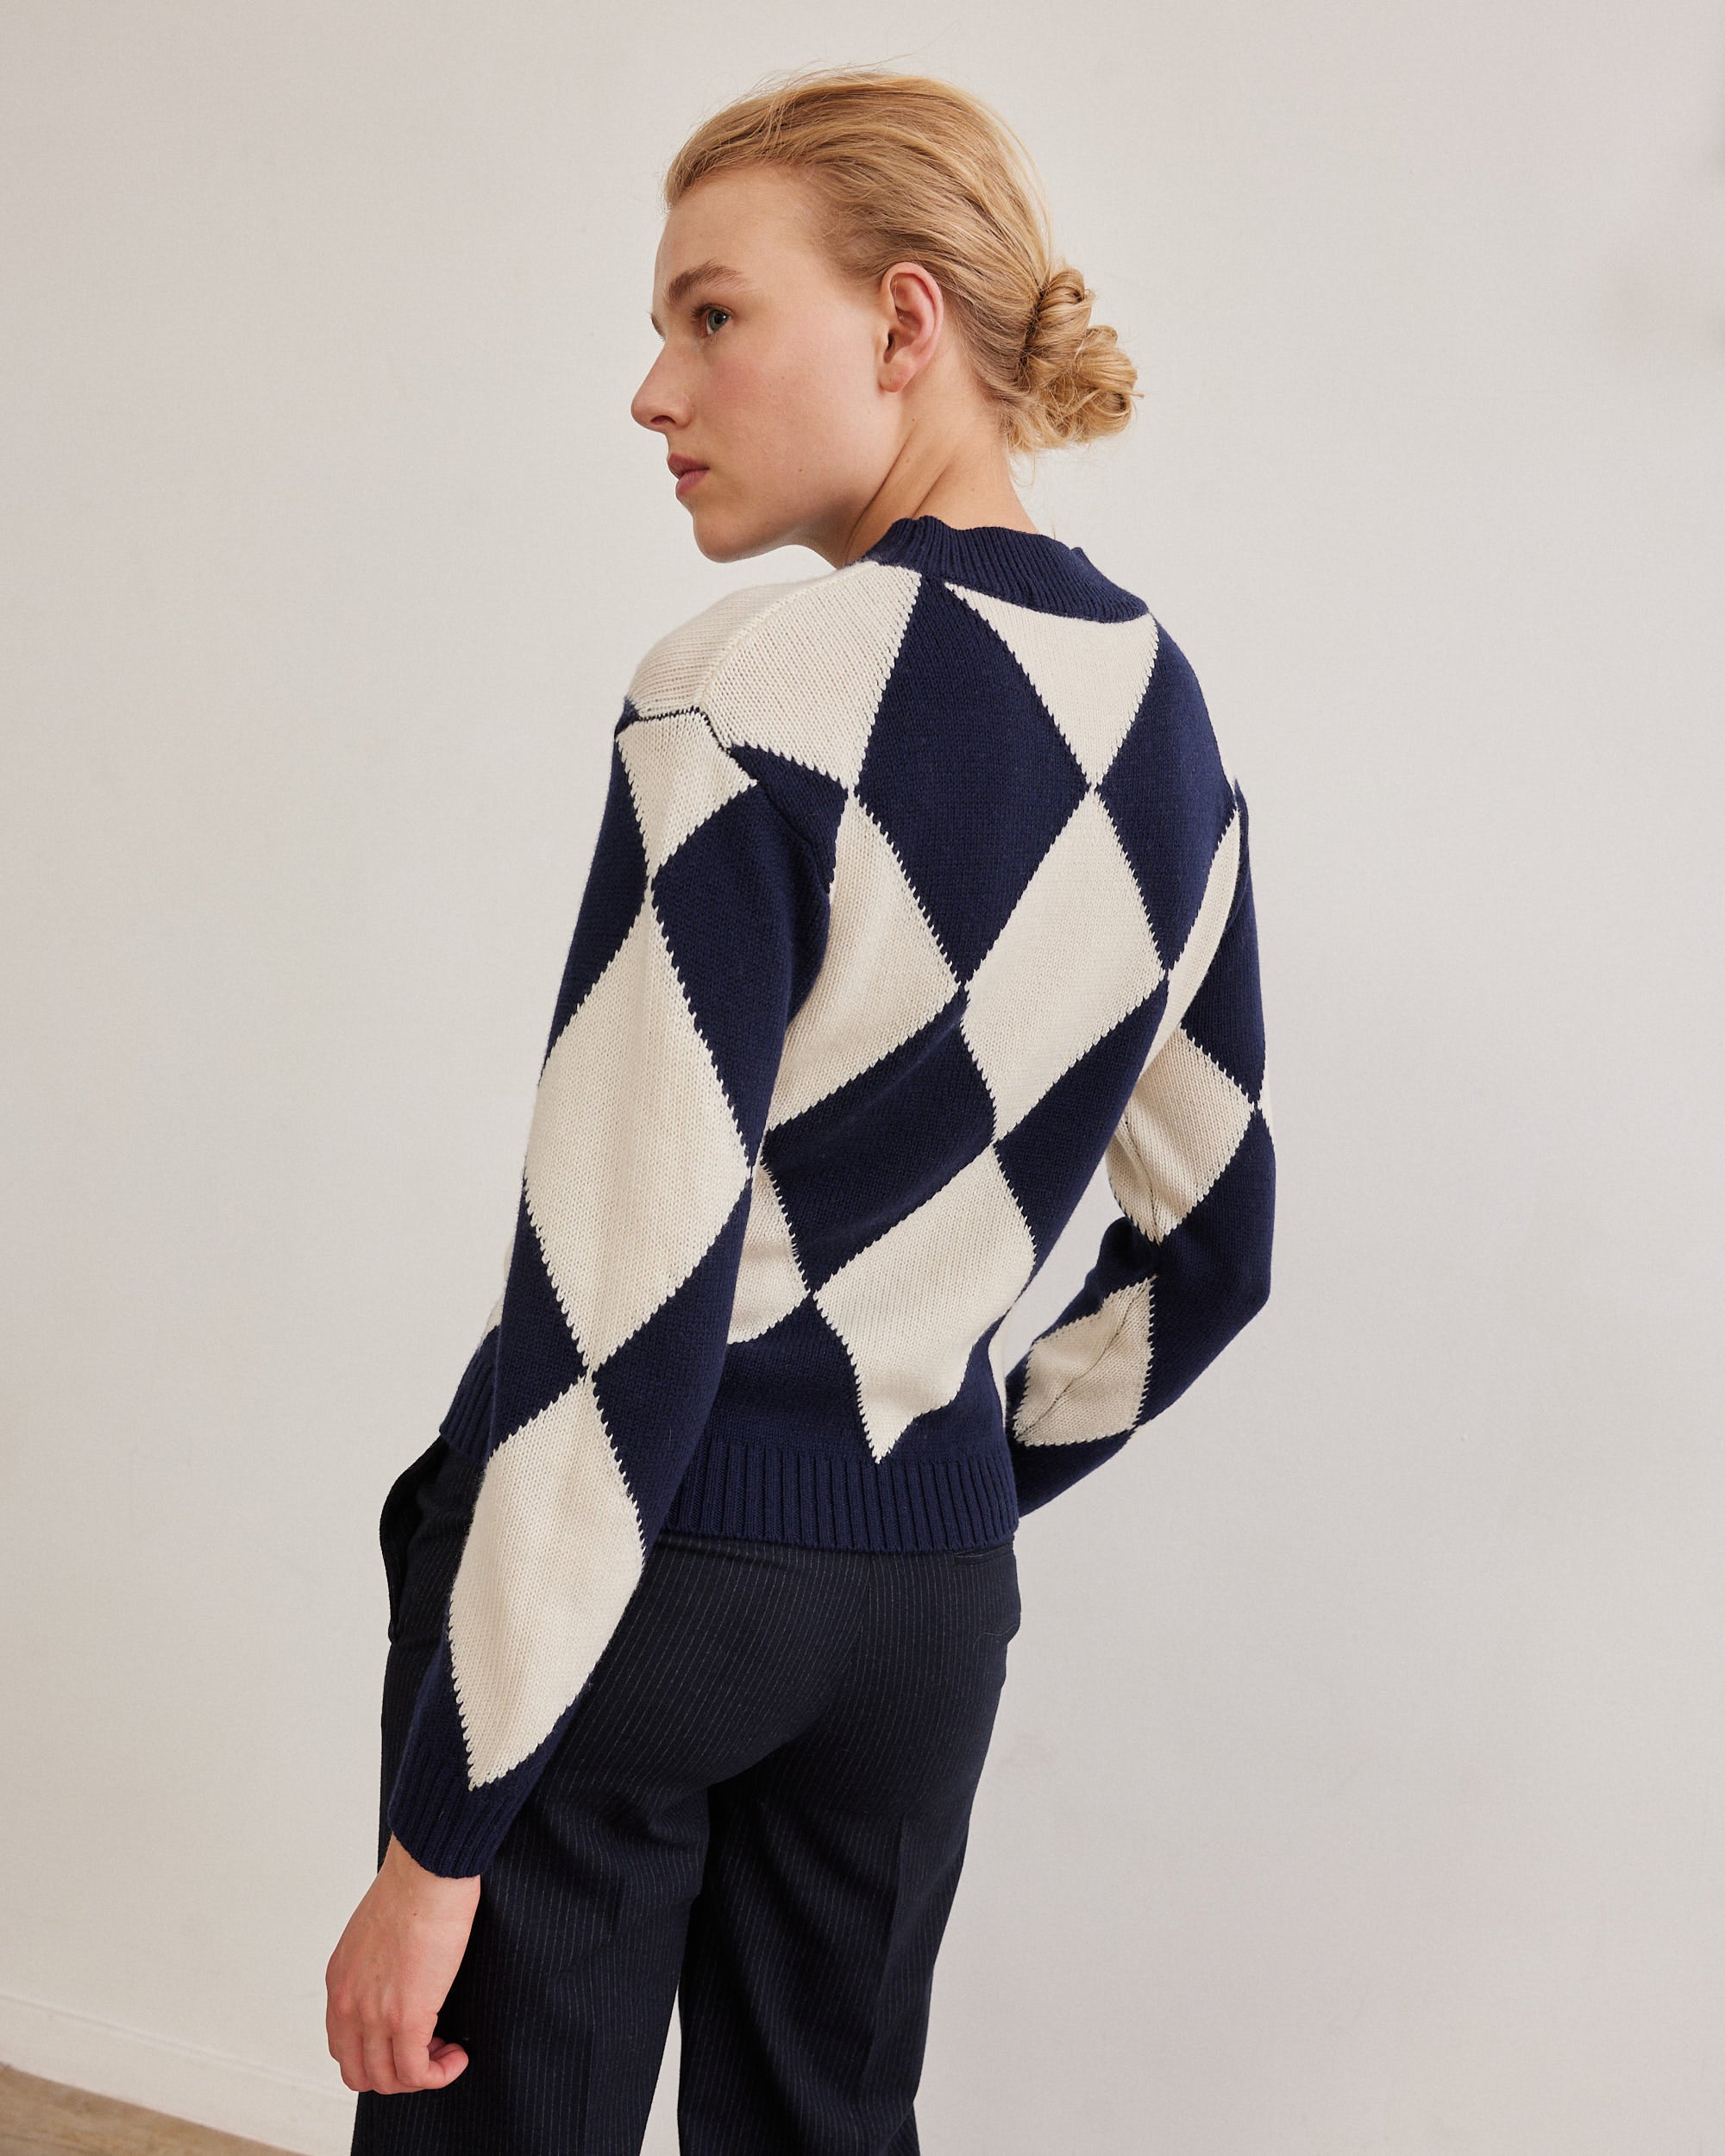 AW23' collection – Rue Blanche